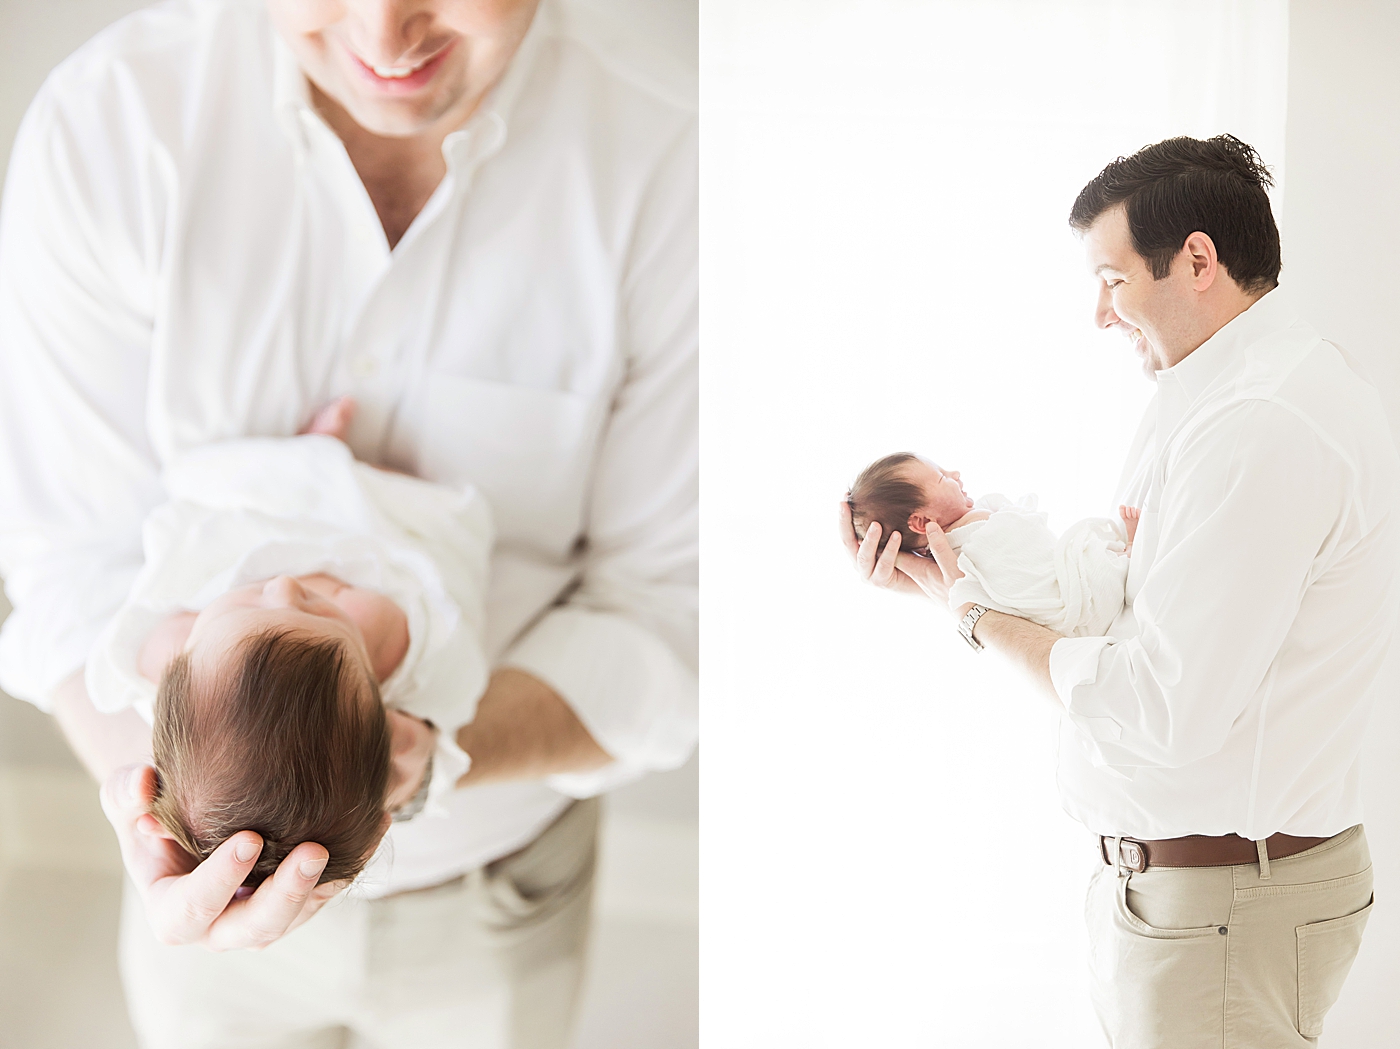 Dad holding his baby girl. Photo by Fresh Light Photography.